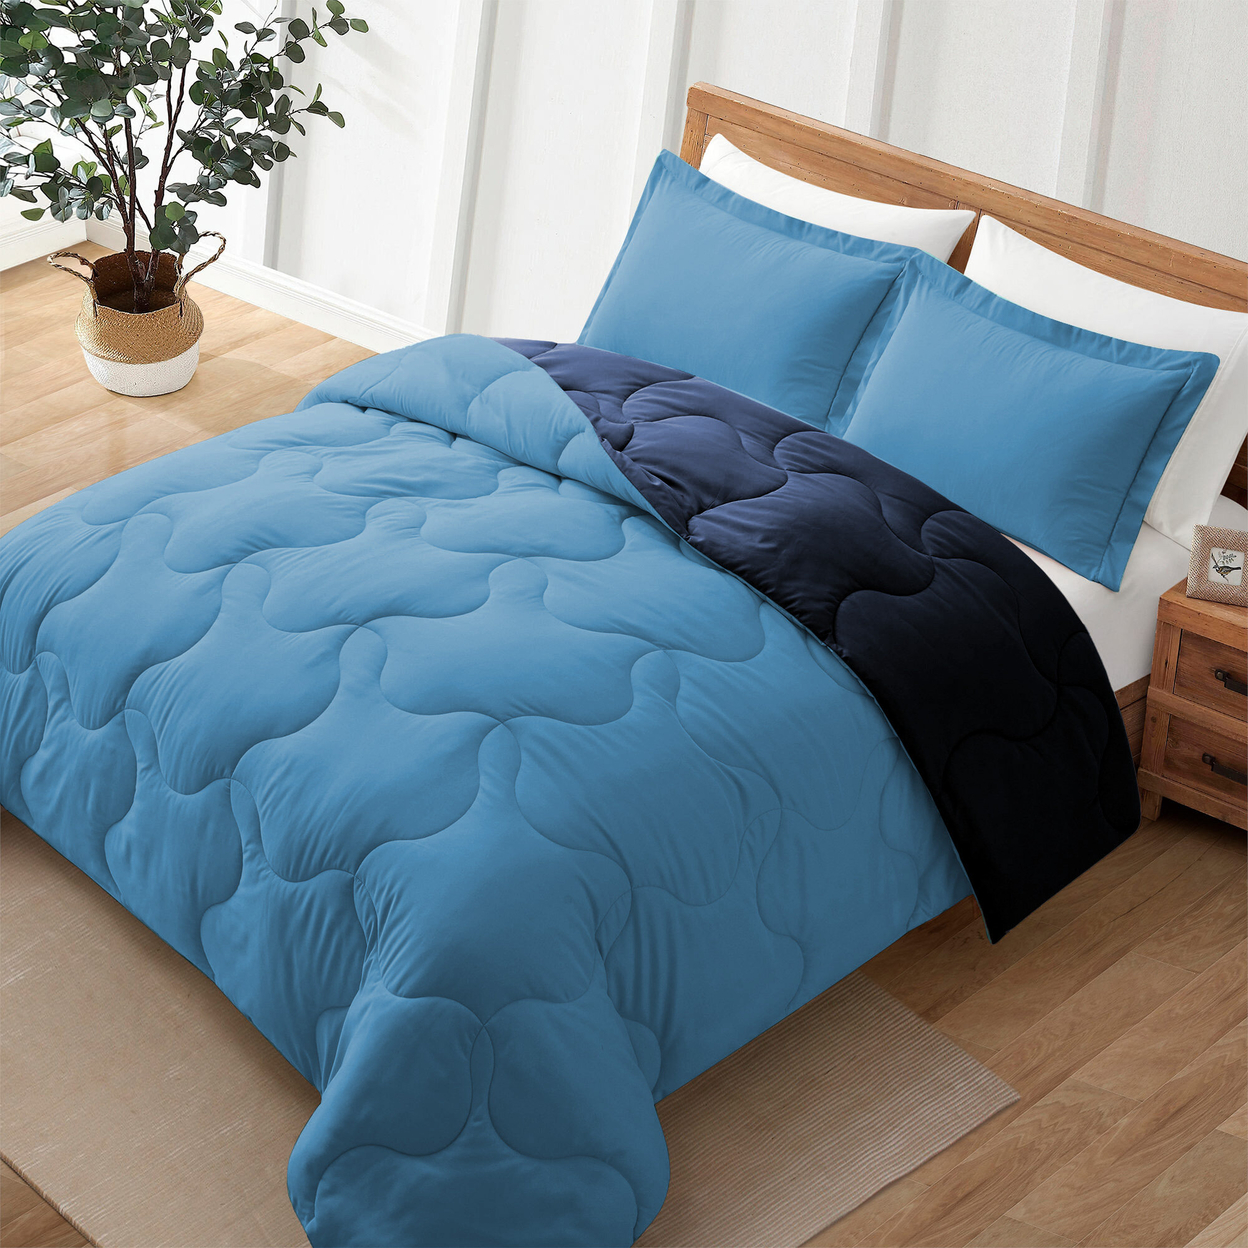 3 Or 2 Pieces Lightweight Reversible Comforter Set With Pillow Shams - Light Blue/Navy Blue, Twin